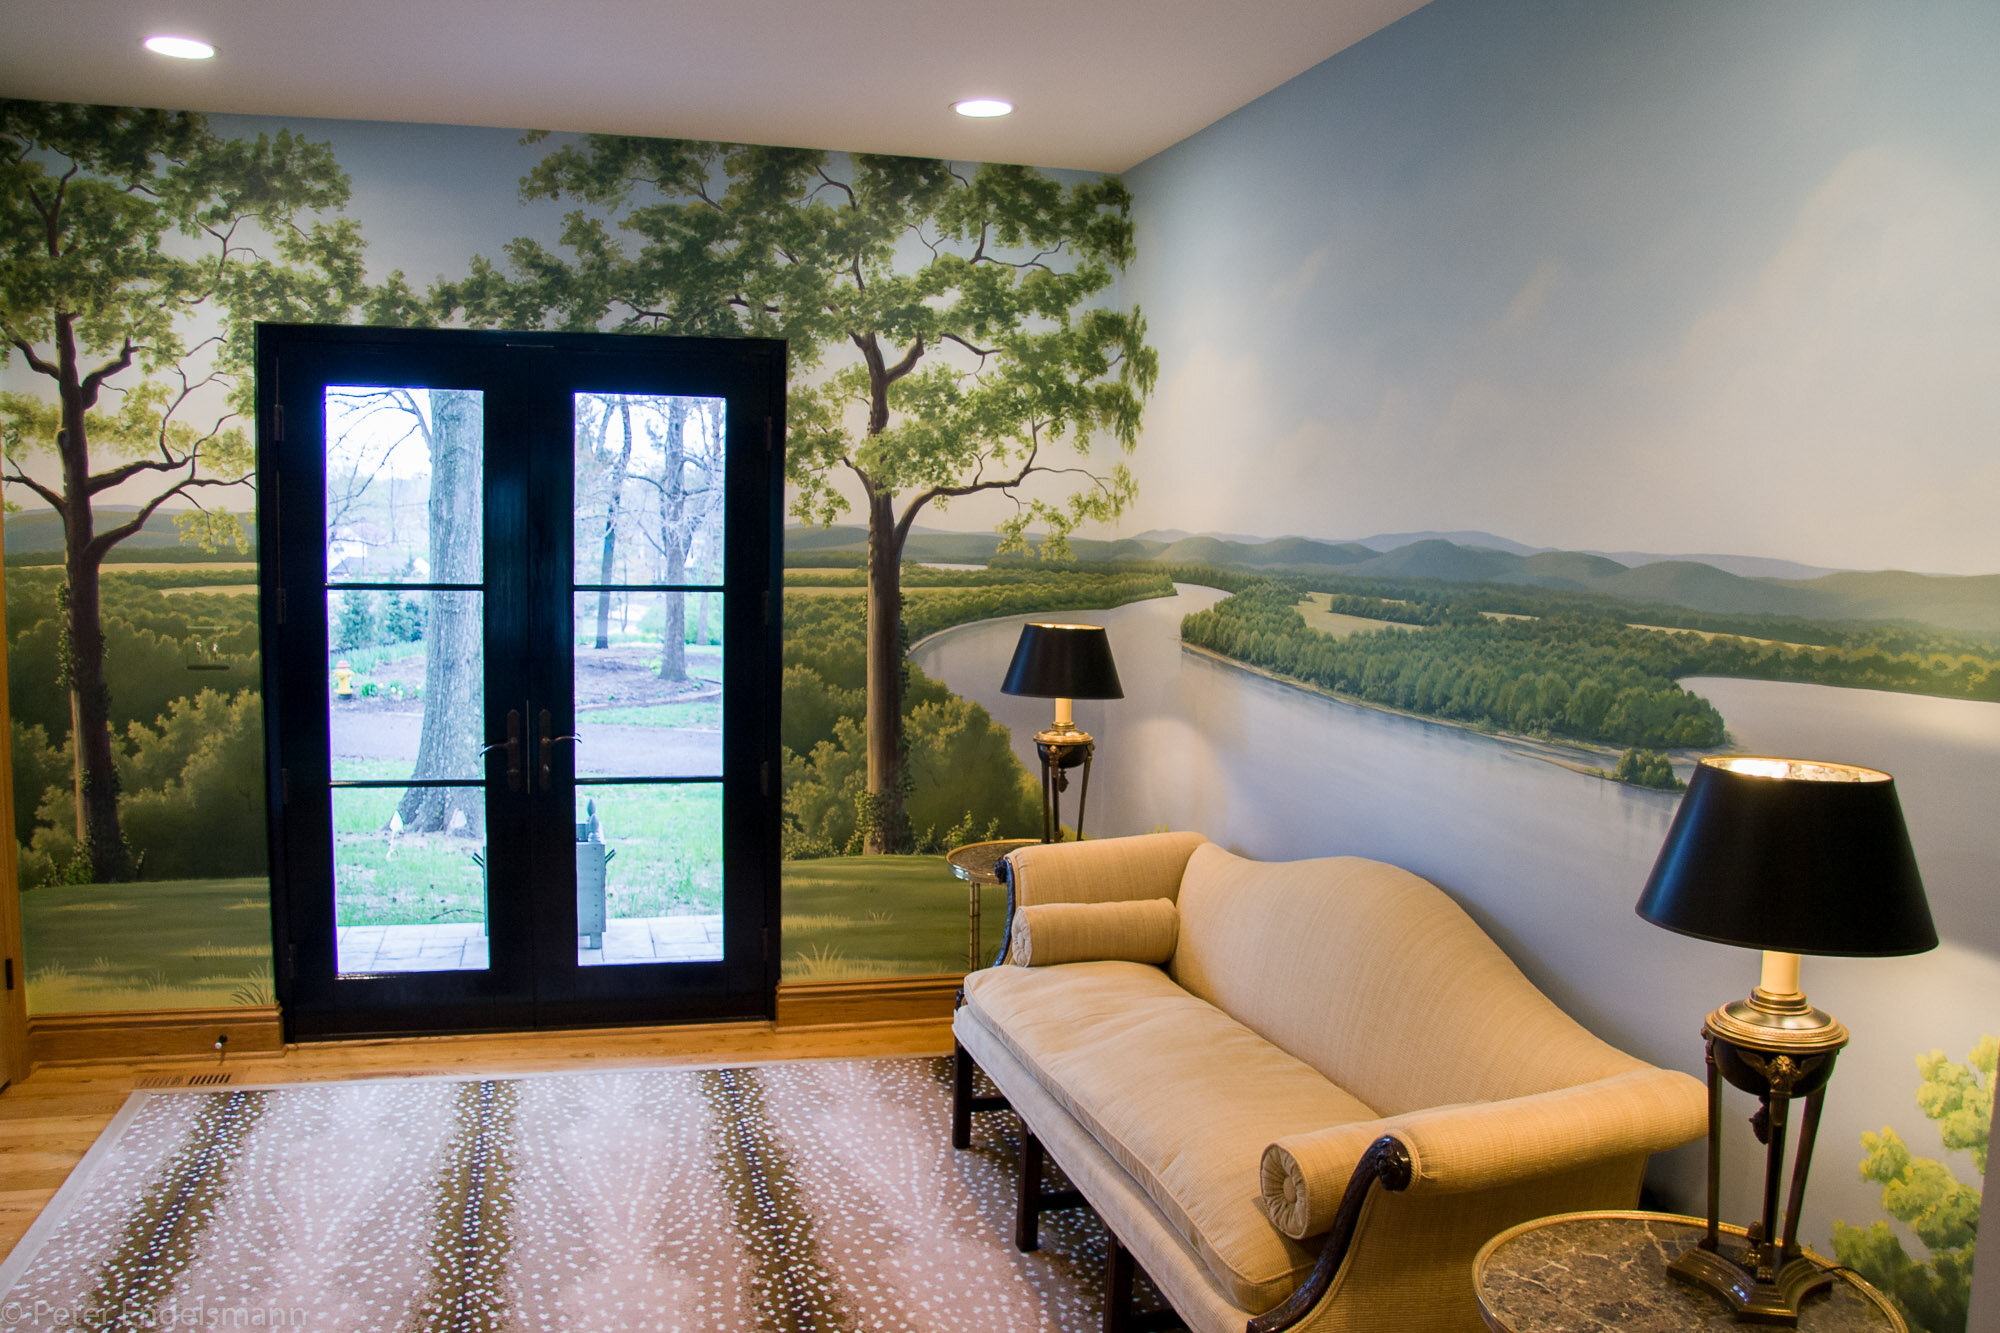  River Confluence Mural, acrylic on wallboard, private residence. © Peter K. Engelsmann 